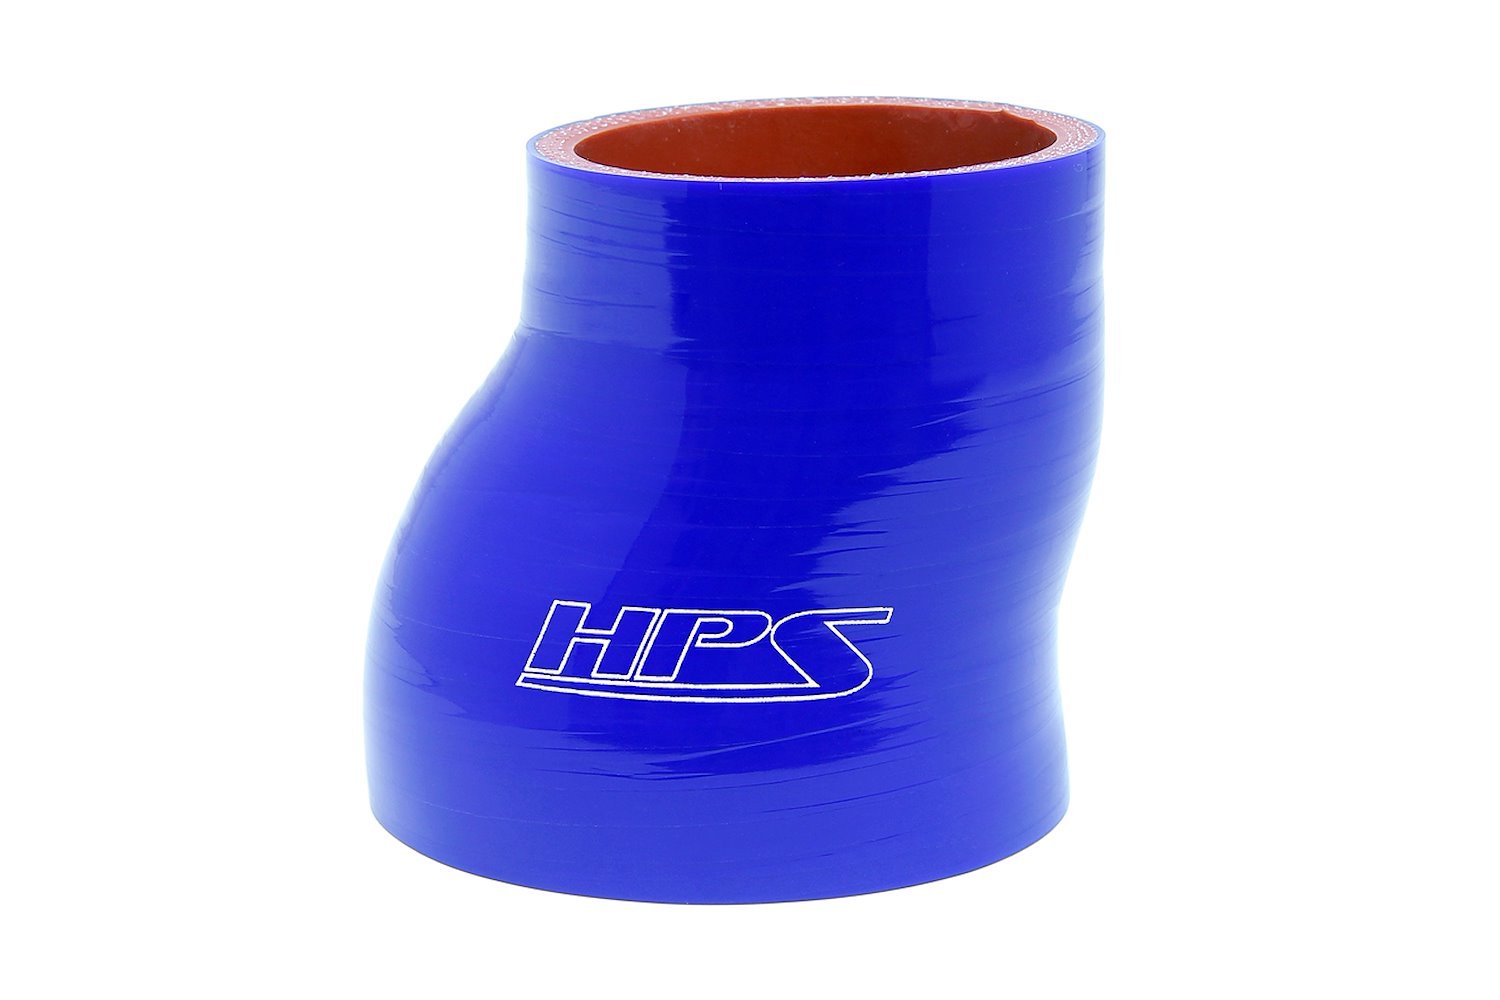 HTSOR-225-300-BLUE Silicone Offset Reducer Hose, High-Temp Reinforced, 2-1/4 in. - 3 in. ID, 3 in. Long, Blue